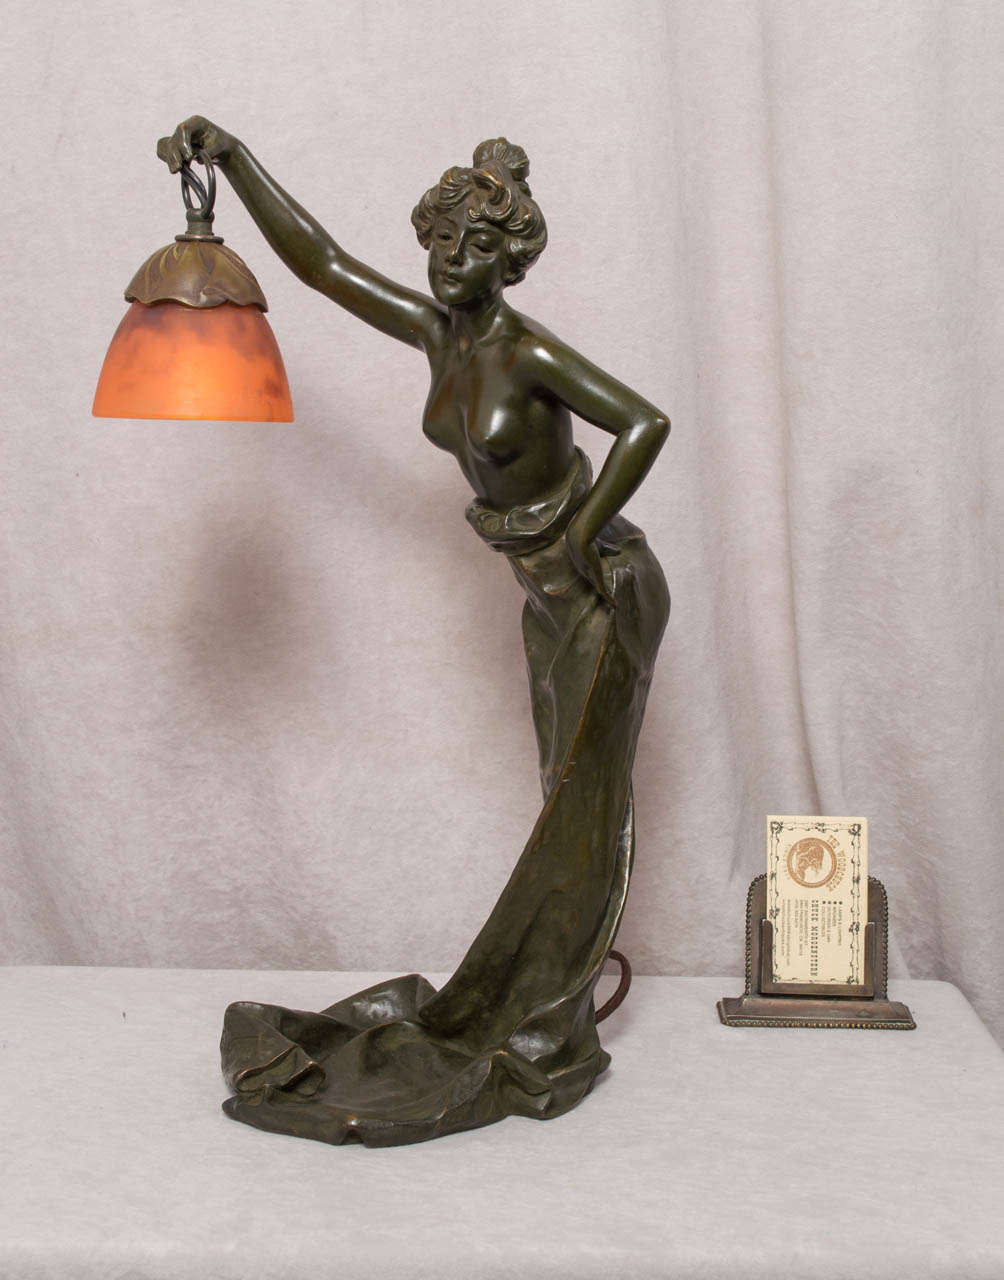 For those who are getting started in art nouveau, Emmanuele Villanis and his work are essential.  If you are not familiar with this fine sculptor, you should check the Berman.Abage Four Volume Set on Bronzes.  More of his works are displayed in